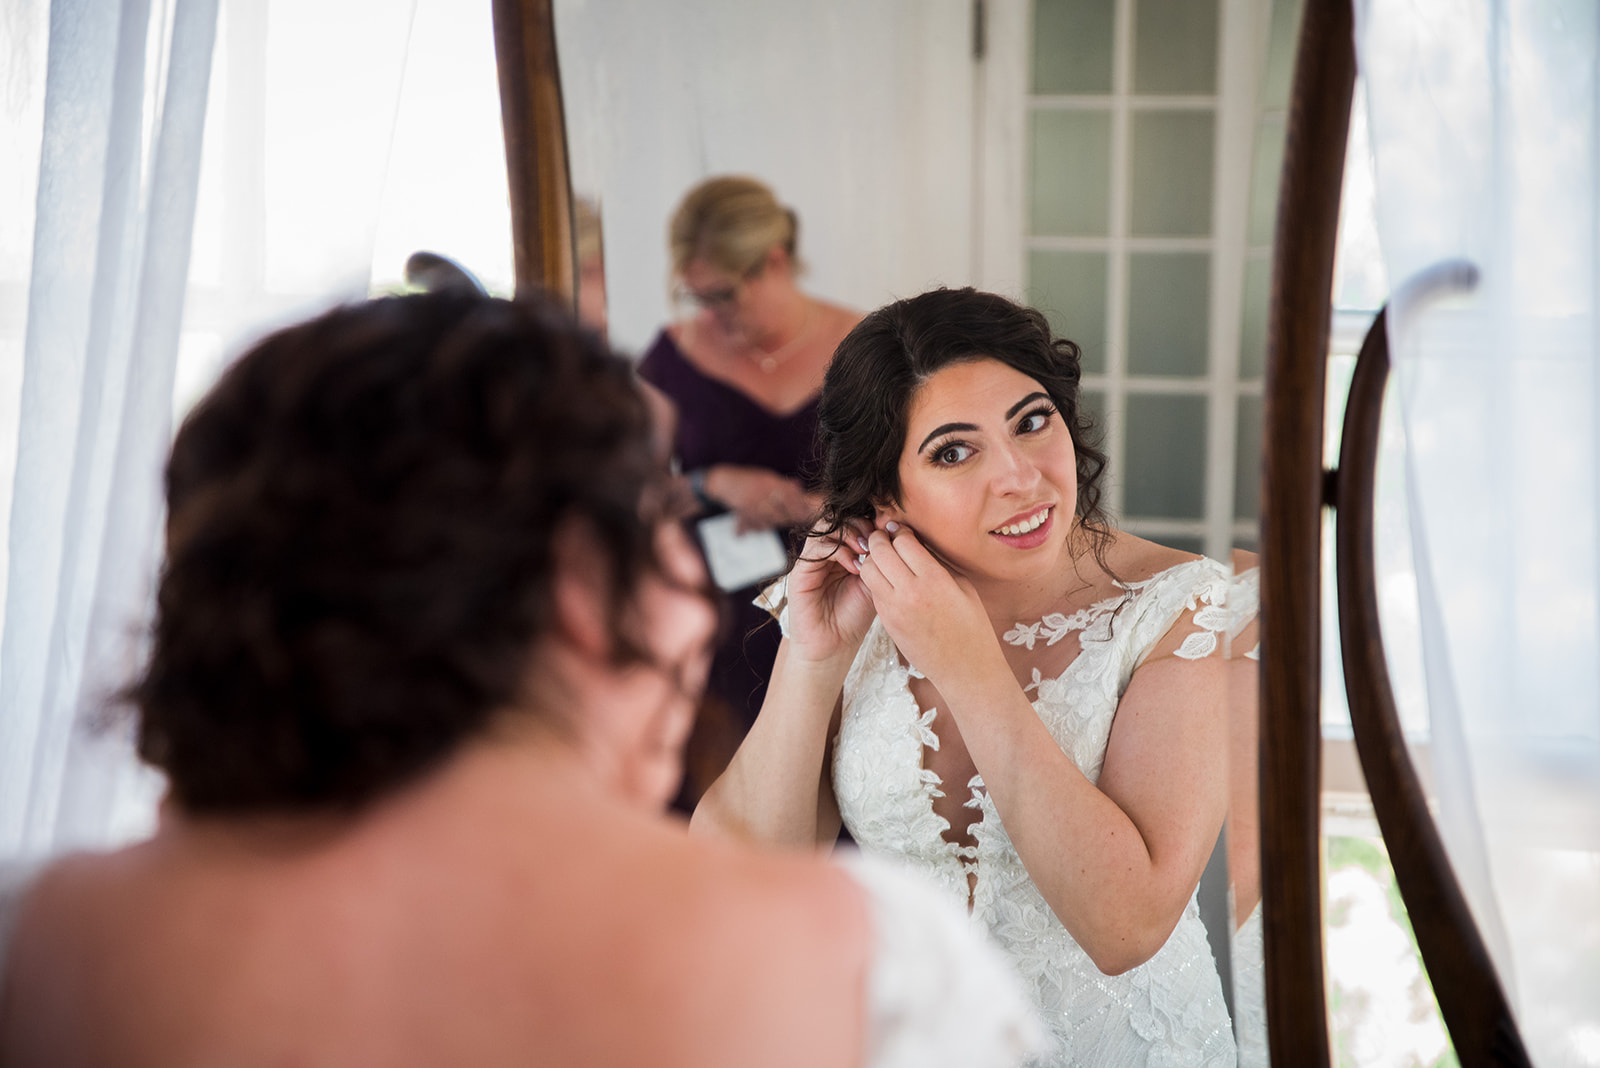 The bride looks in the mirror as she puts on an earring and gets ready for her wedding.